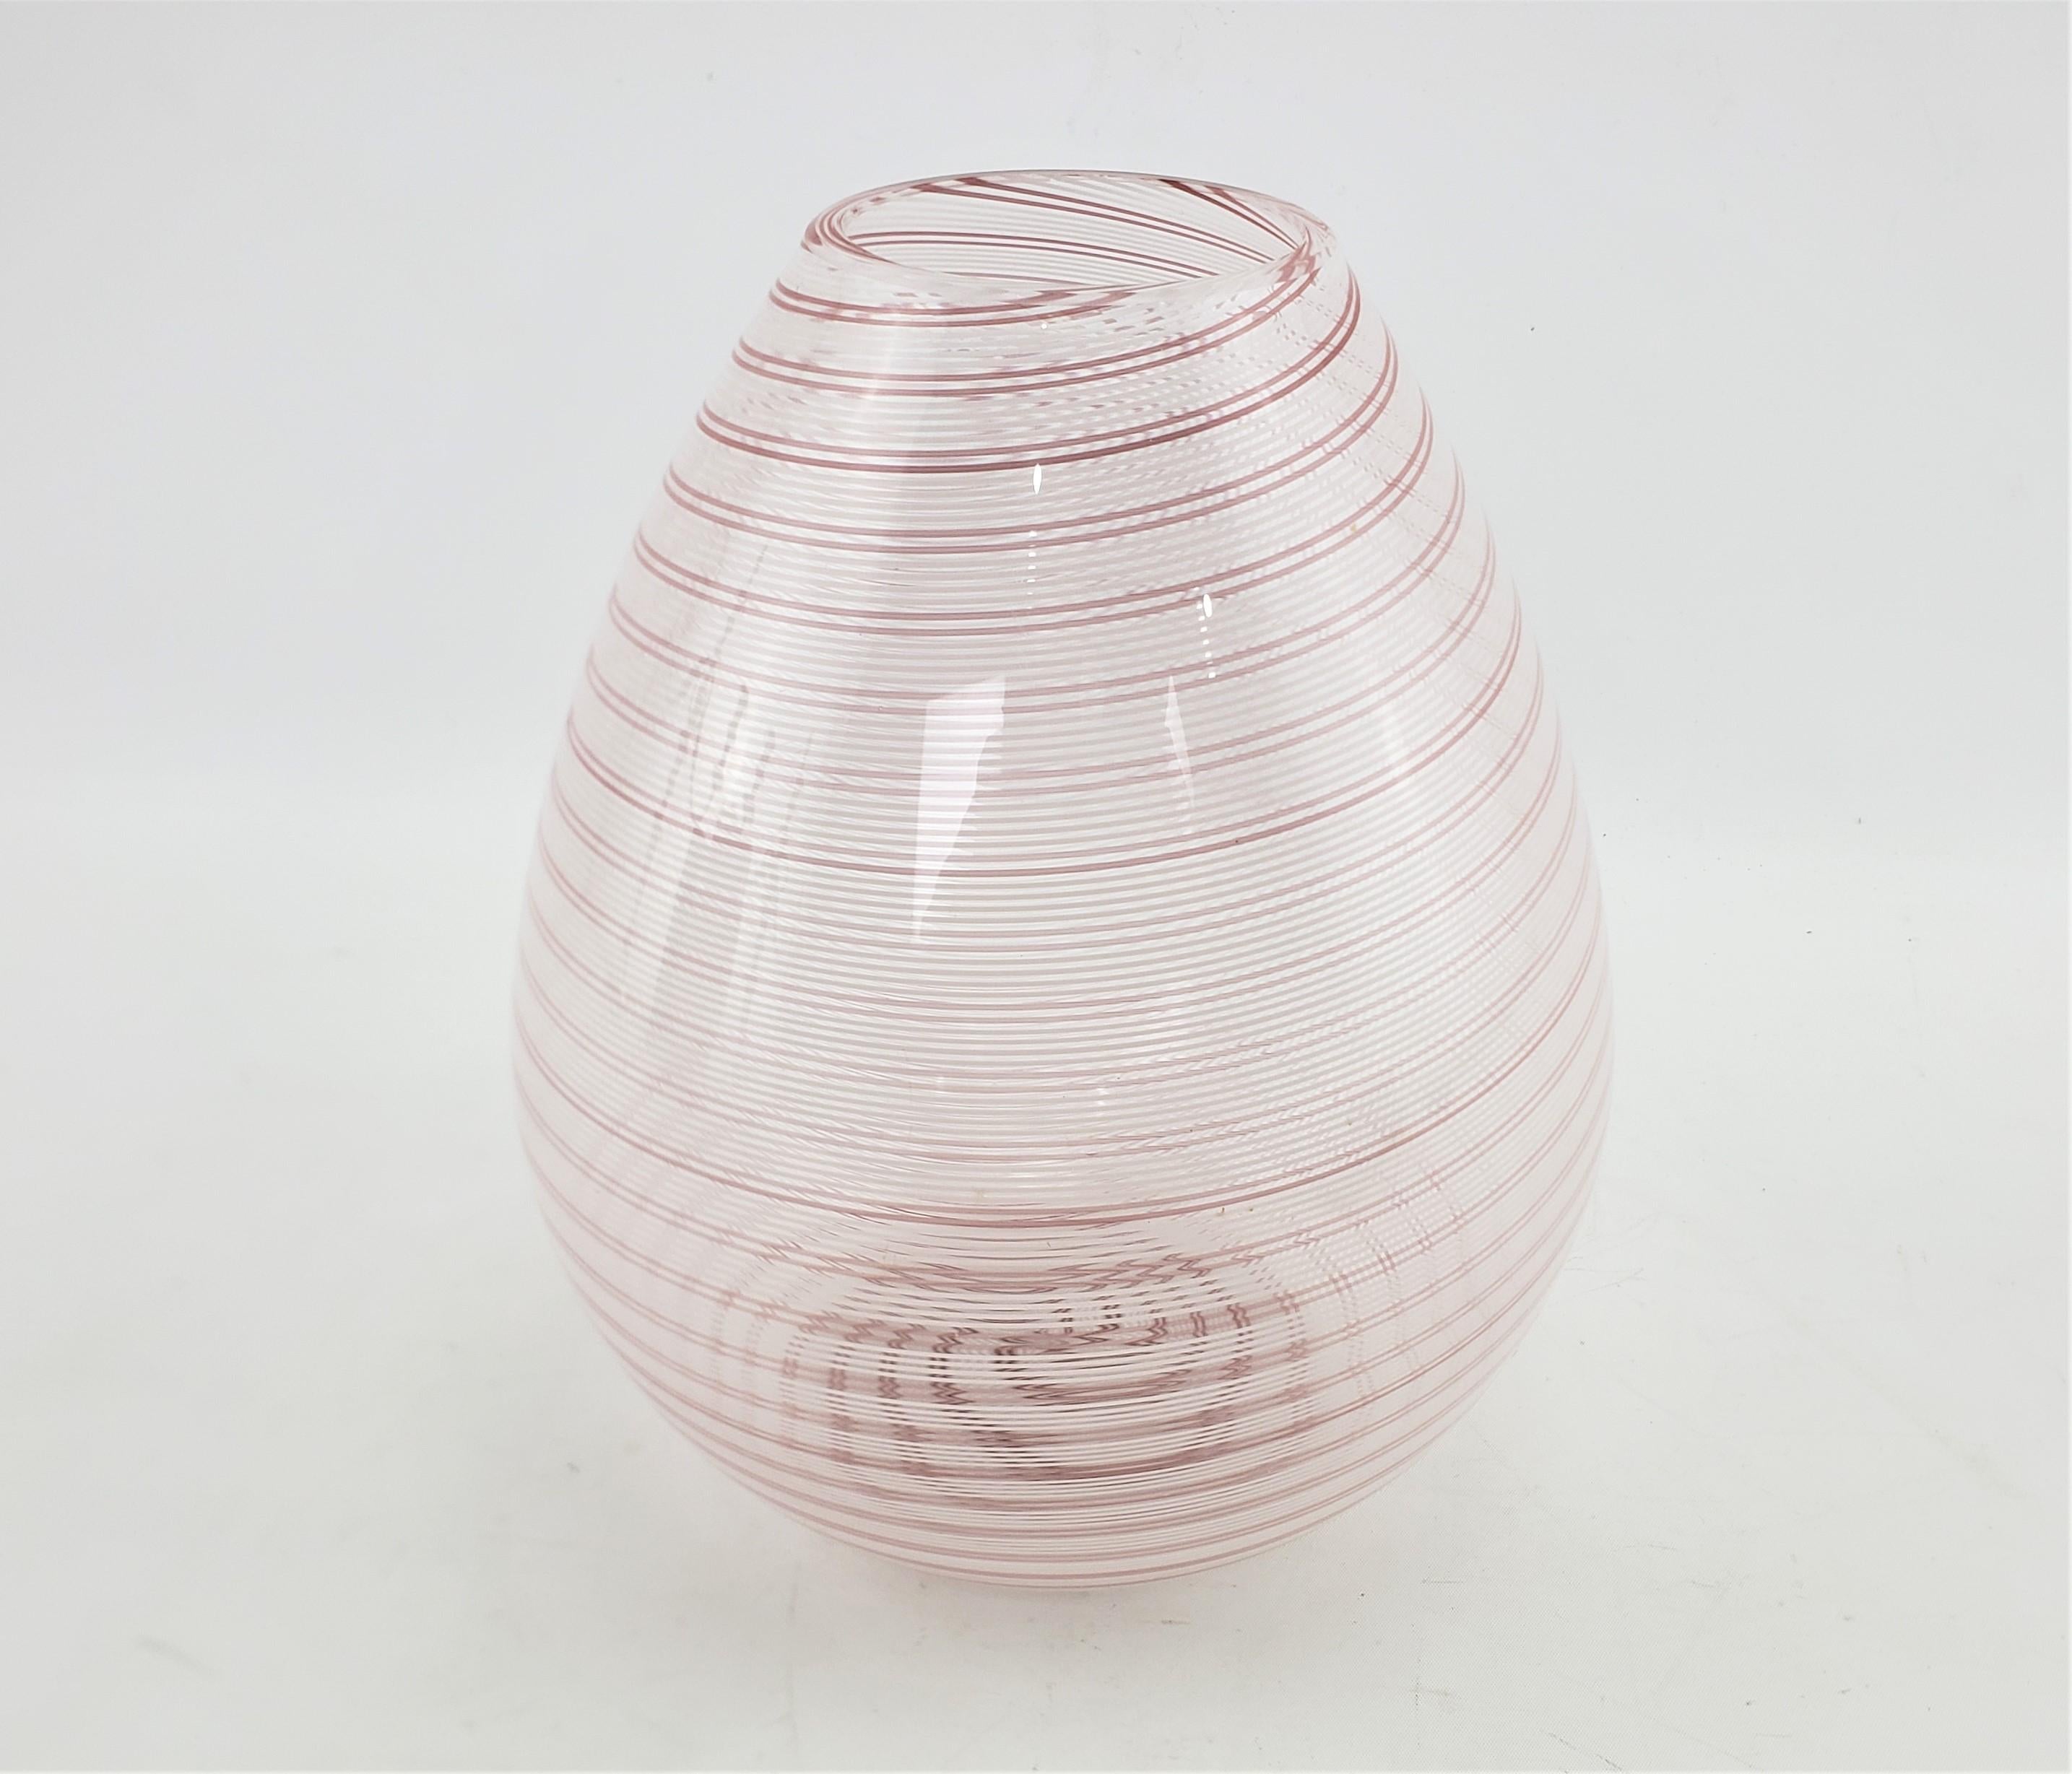 Mid-Century Modern Signed Barovier & Toso Mid-Century Murano Art Glass Candy Cane Ribbon Vase For Sale